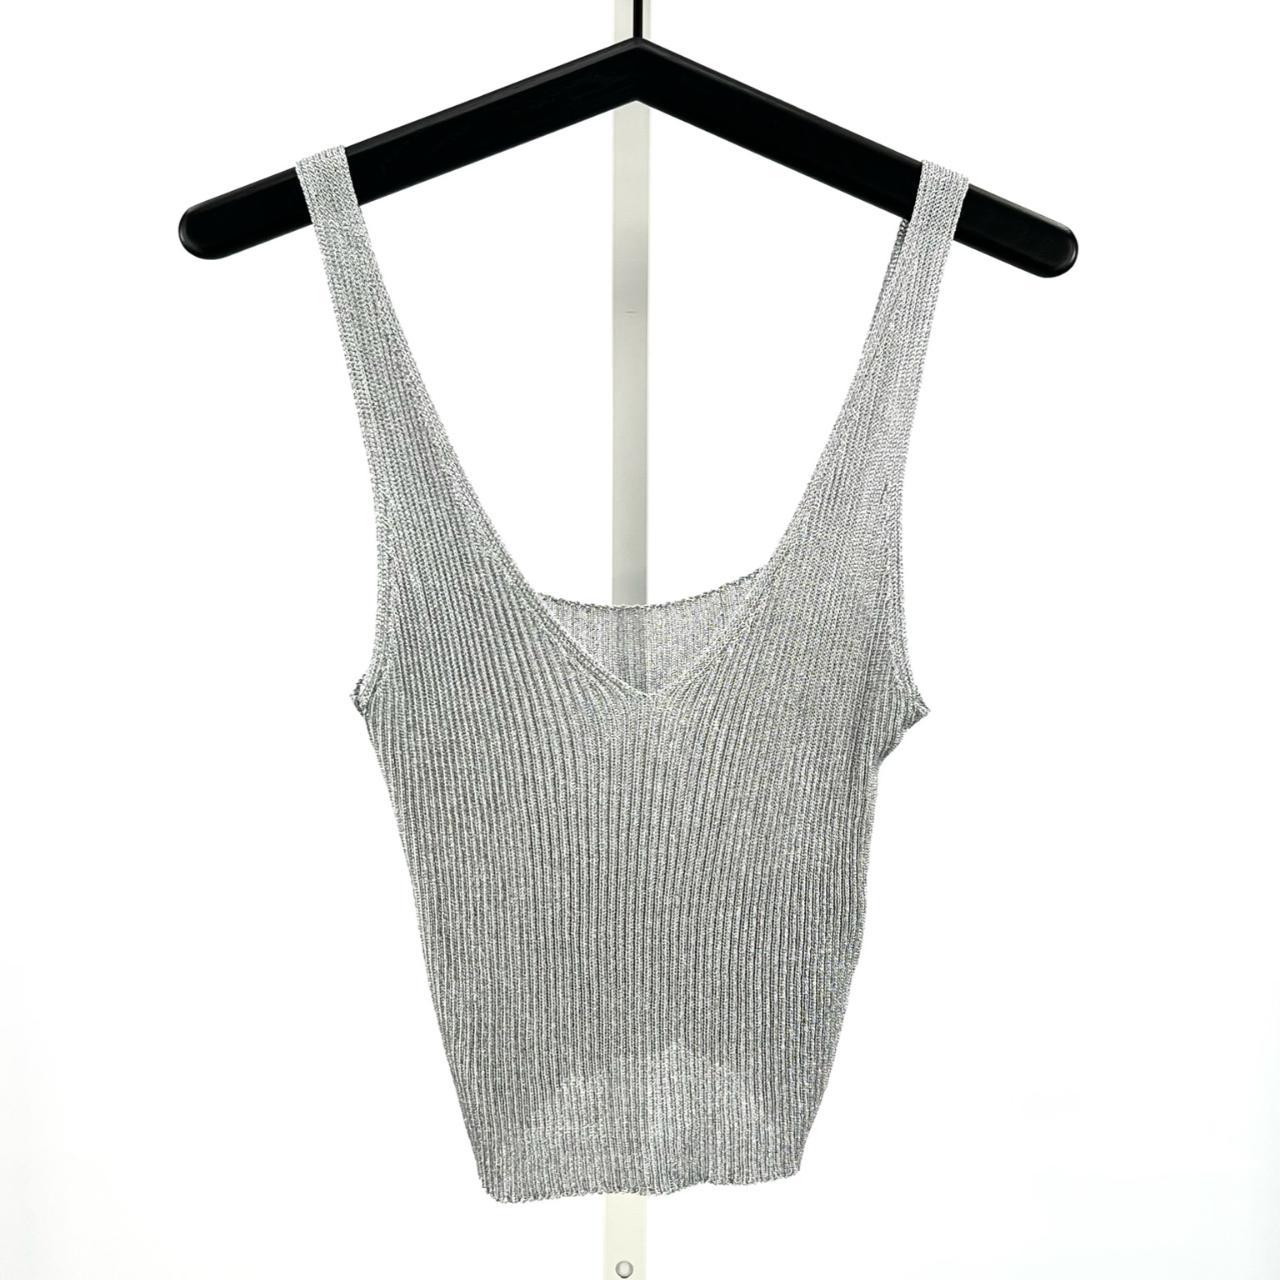 Product Image 1 - The "Siafu" ribbed knit tank